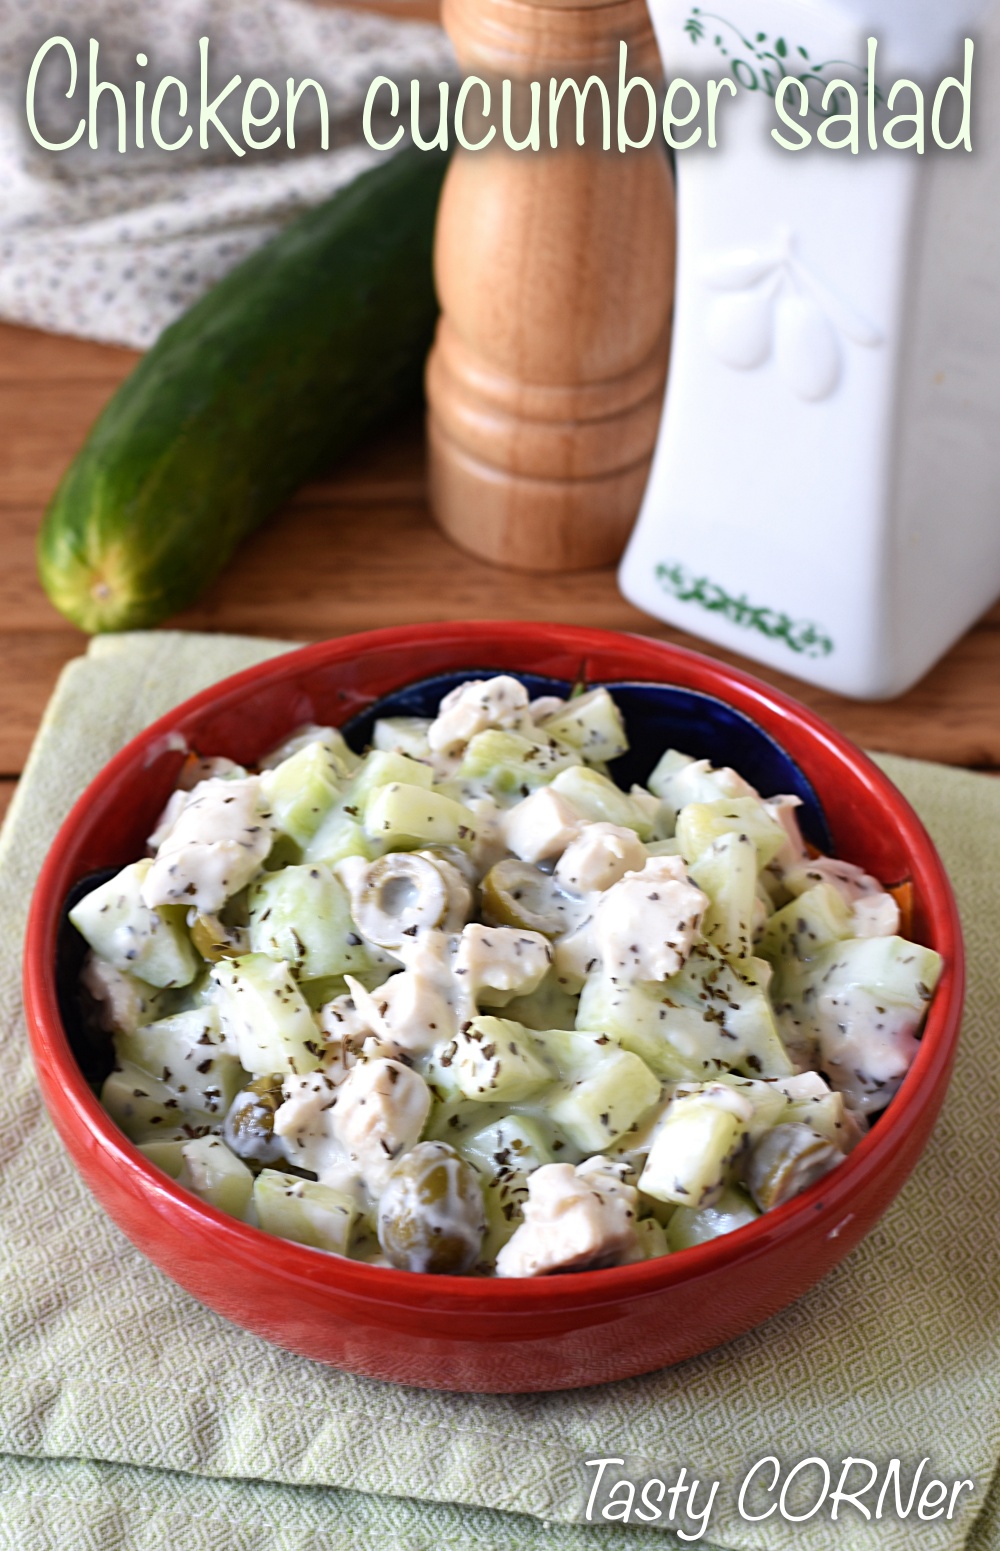 en_v_ chicken cucumber salad with yogurt sauce Healthy and easy recipe for summer by tastycorner